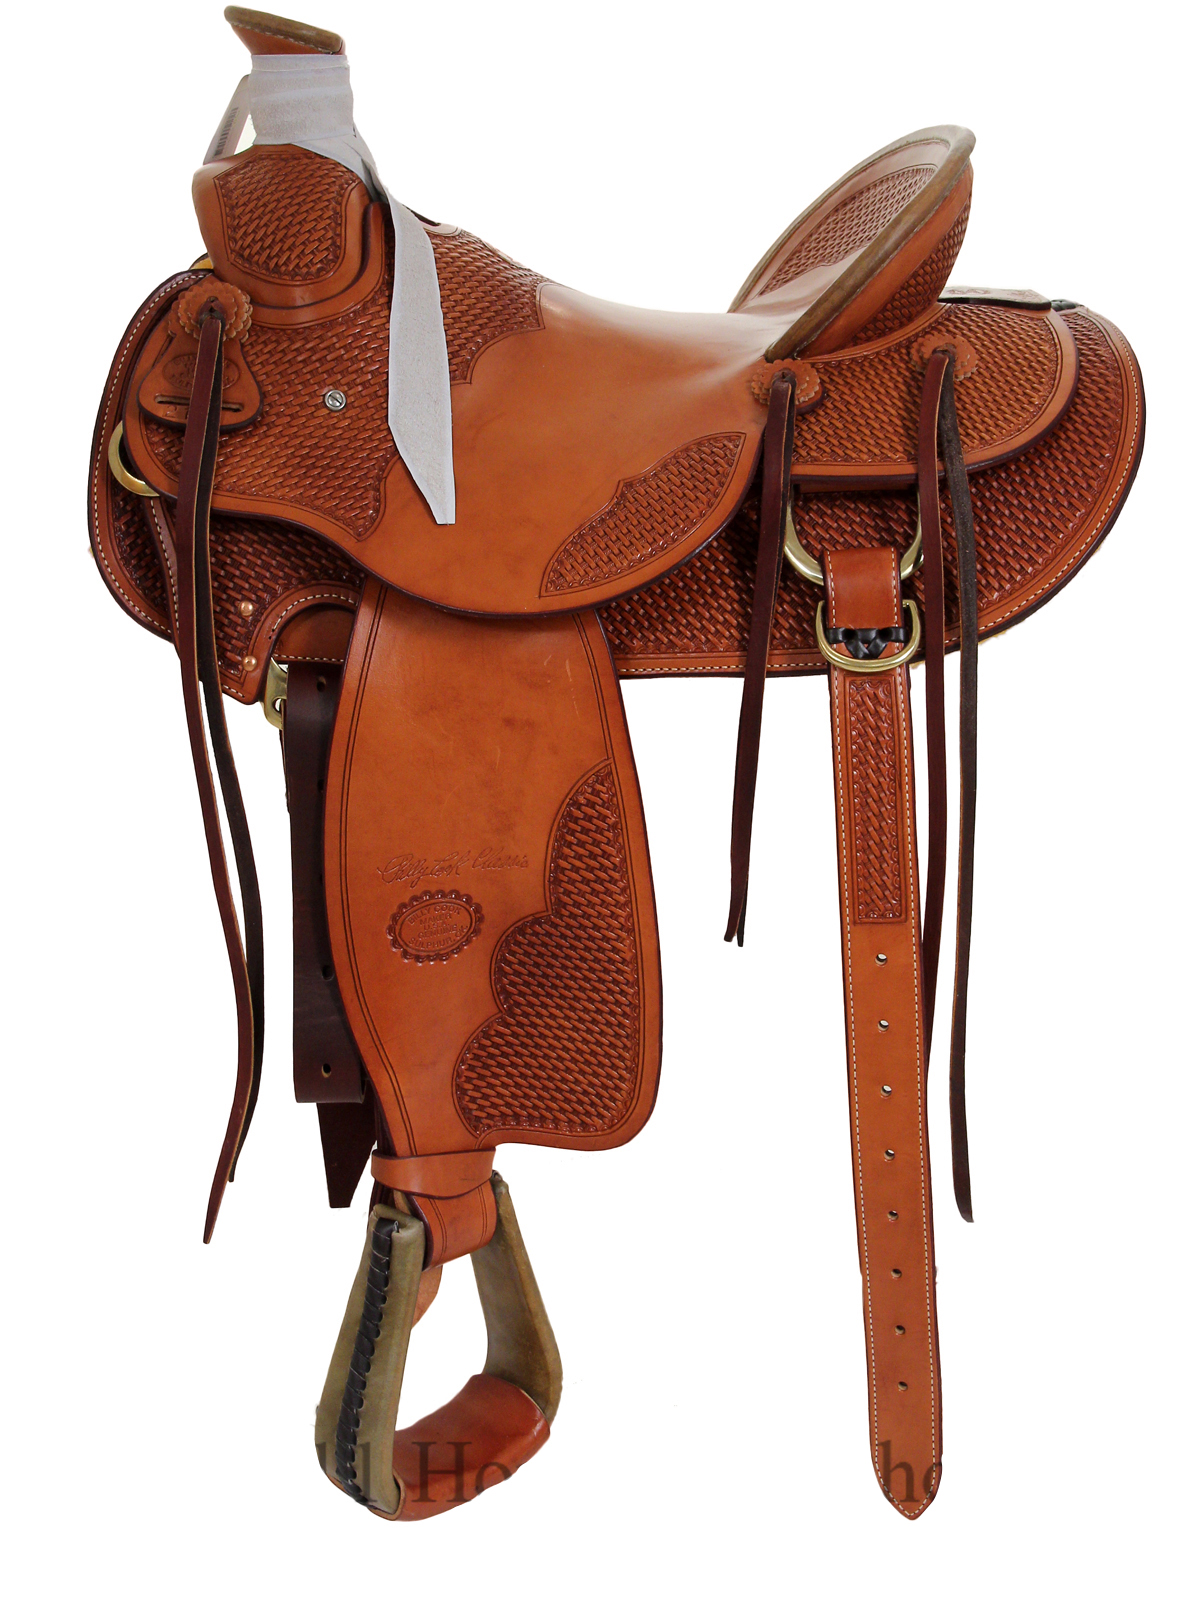 15inch to 17inch Billy Cook Wade Tree Saddle 2181